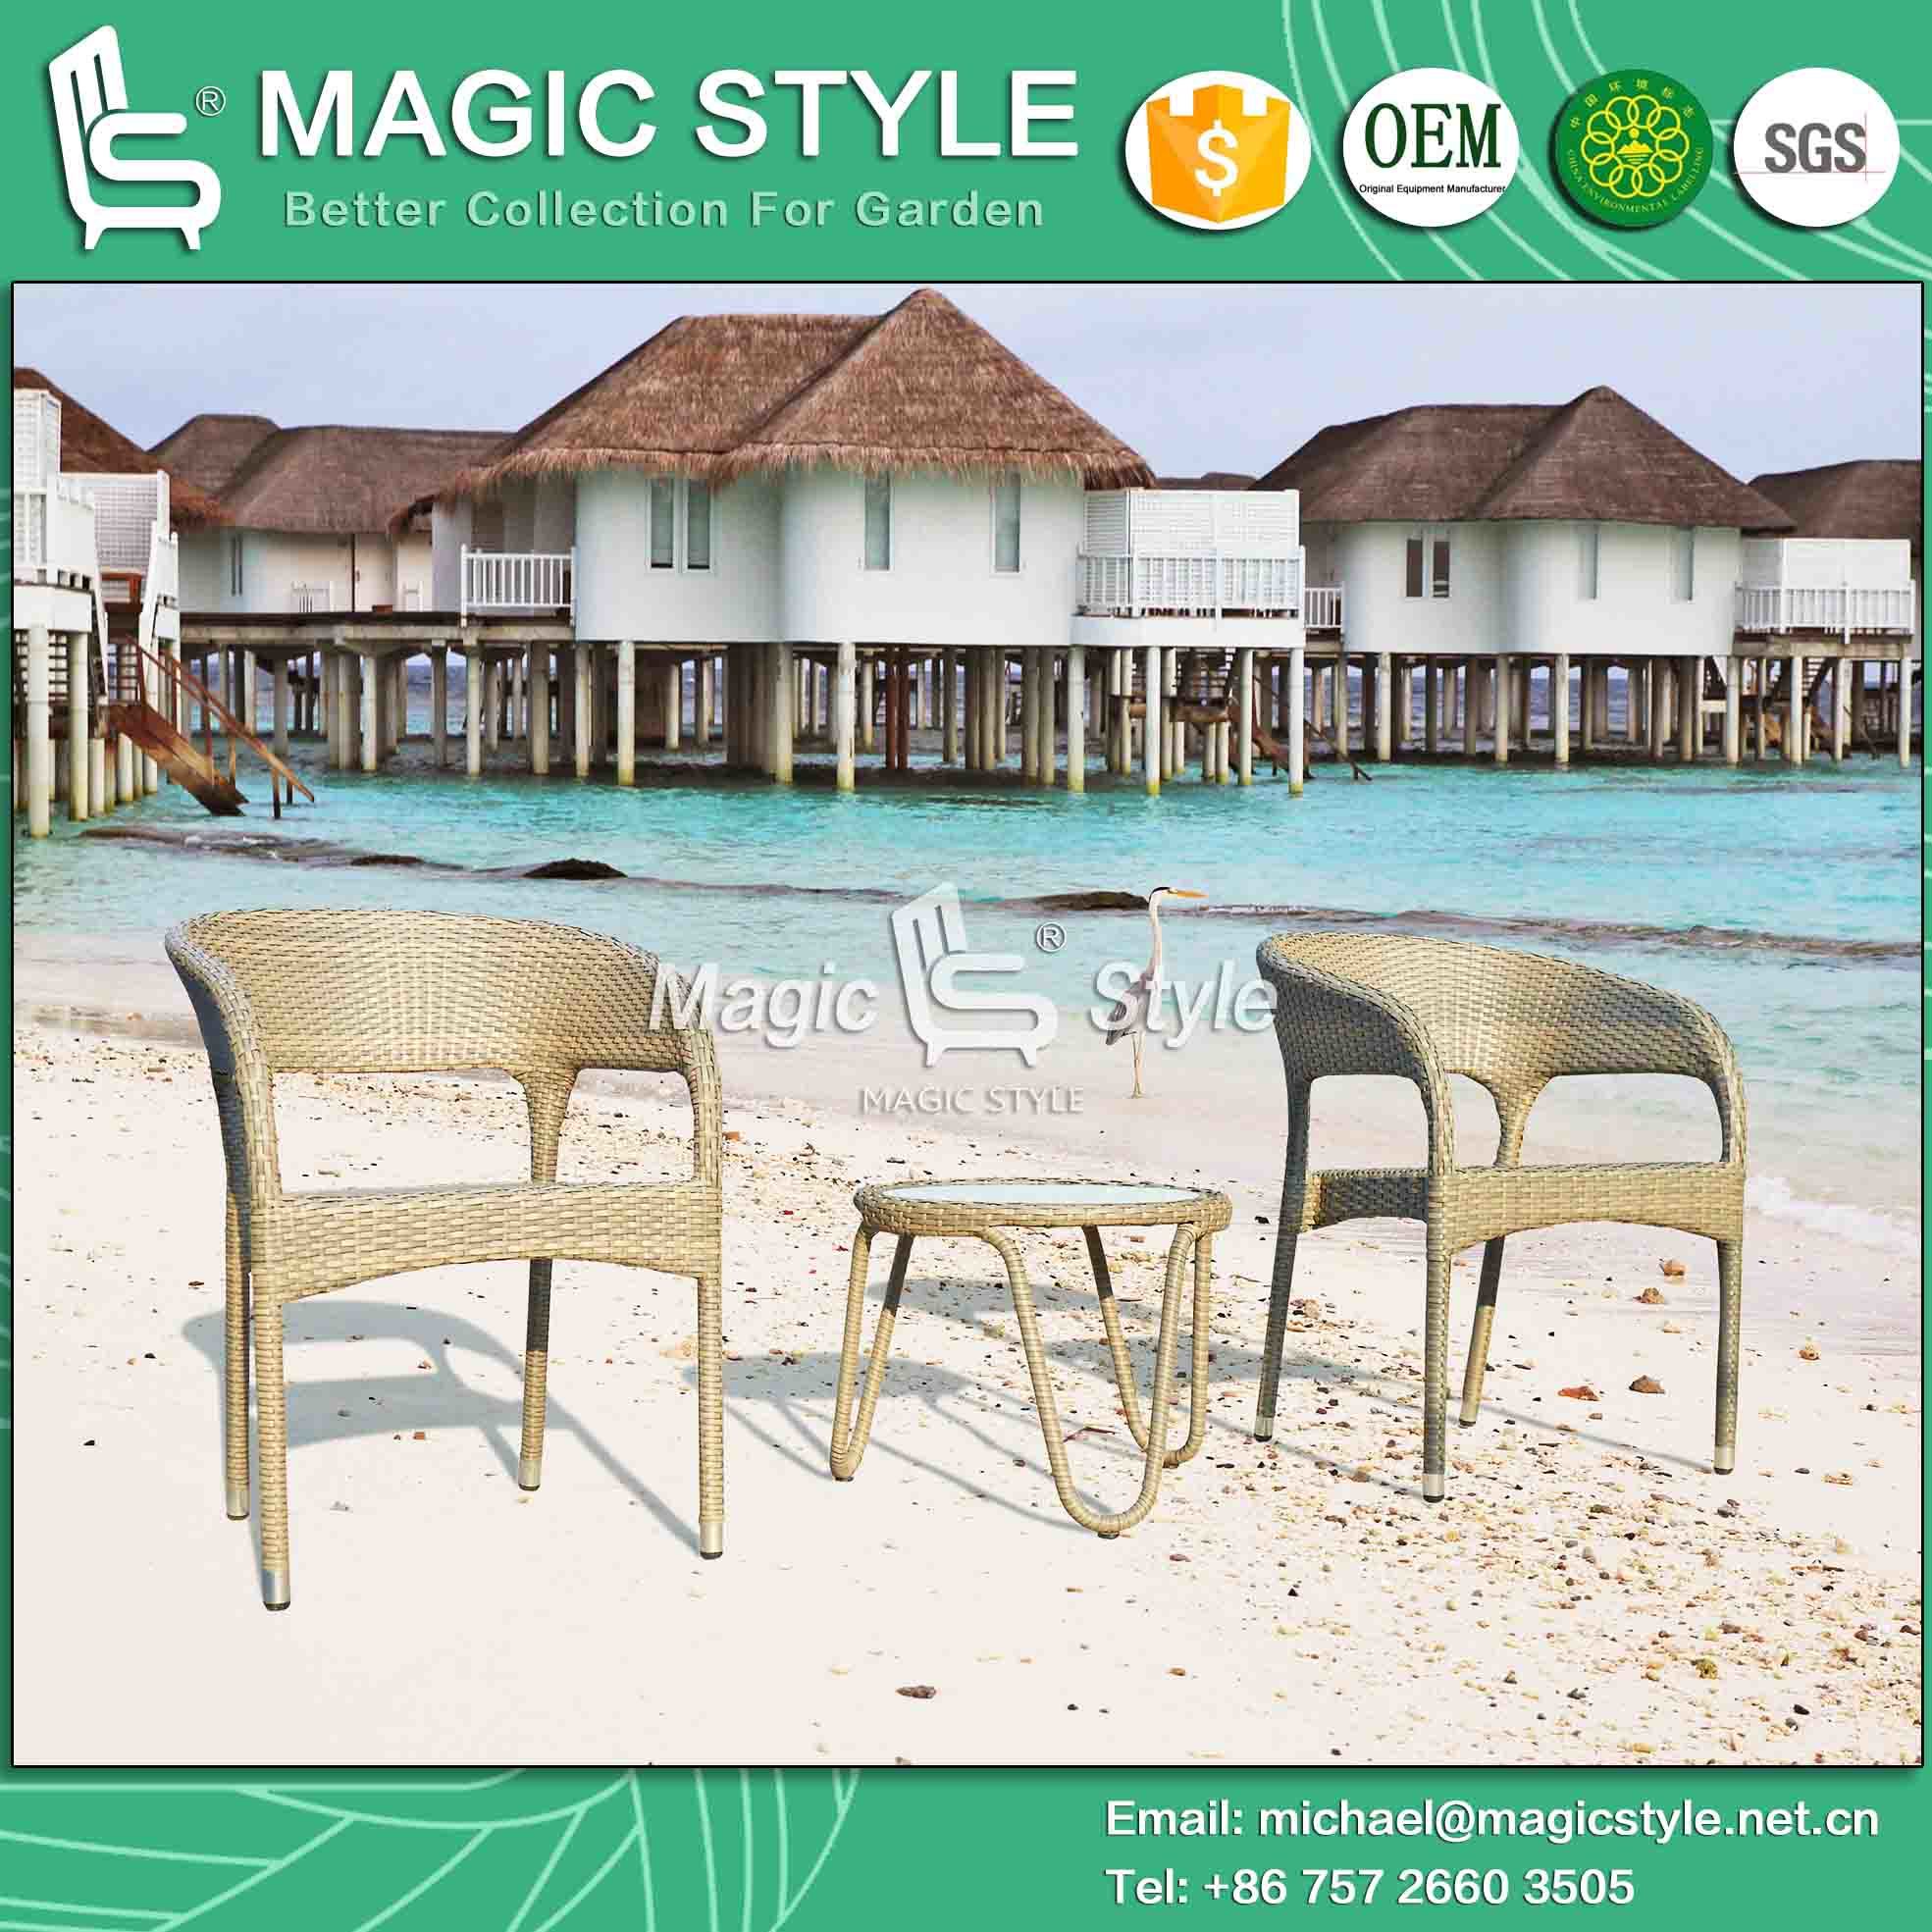 Bail Coffee Set Rattan Chair Wicker Chair Dining Chair Stackable Chair with Side Table (Magic Style)